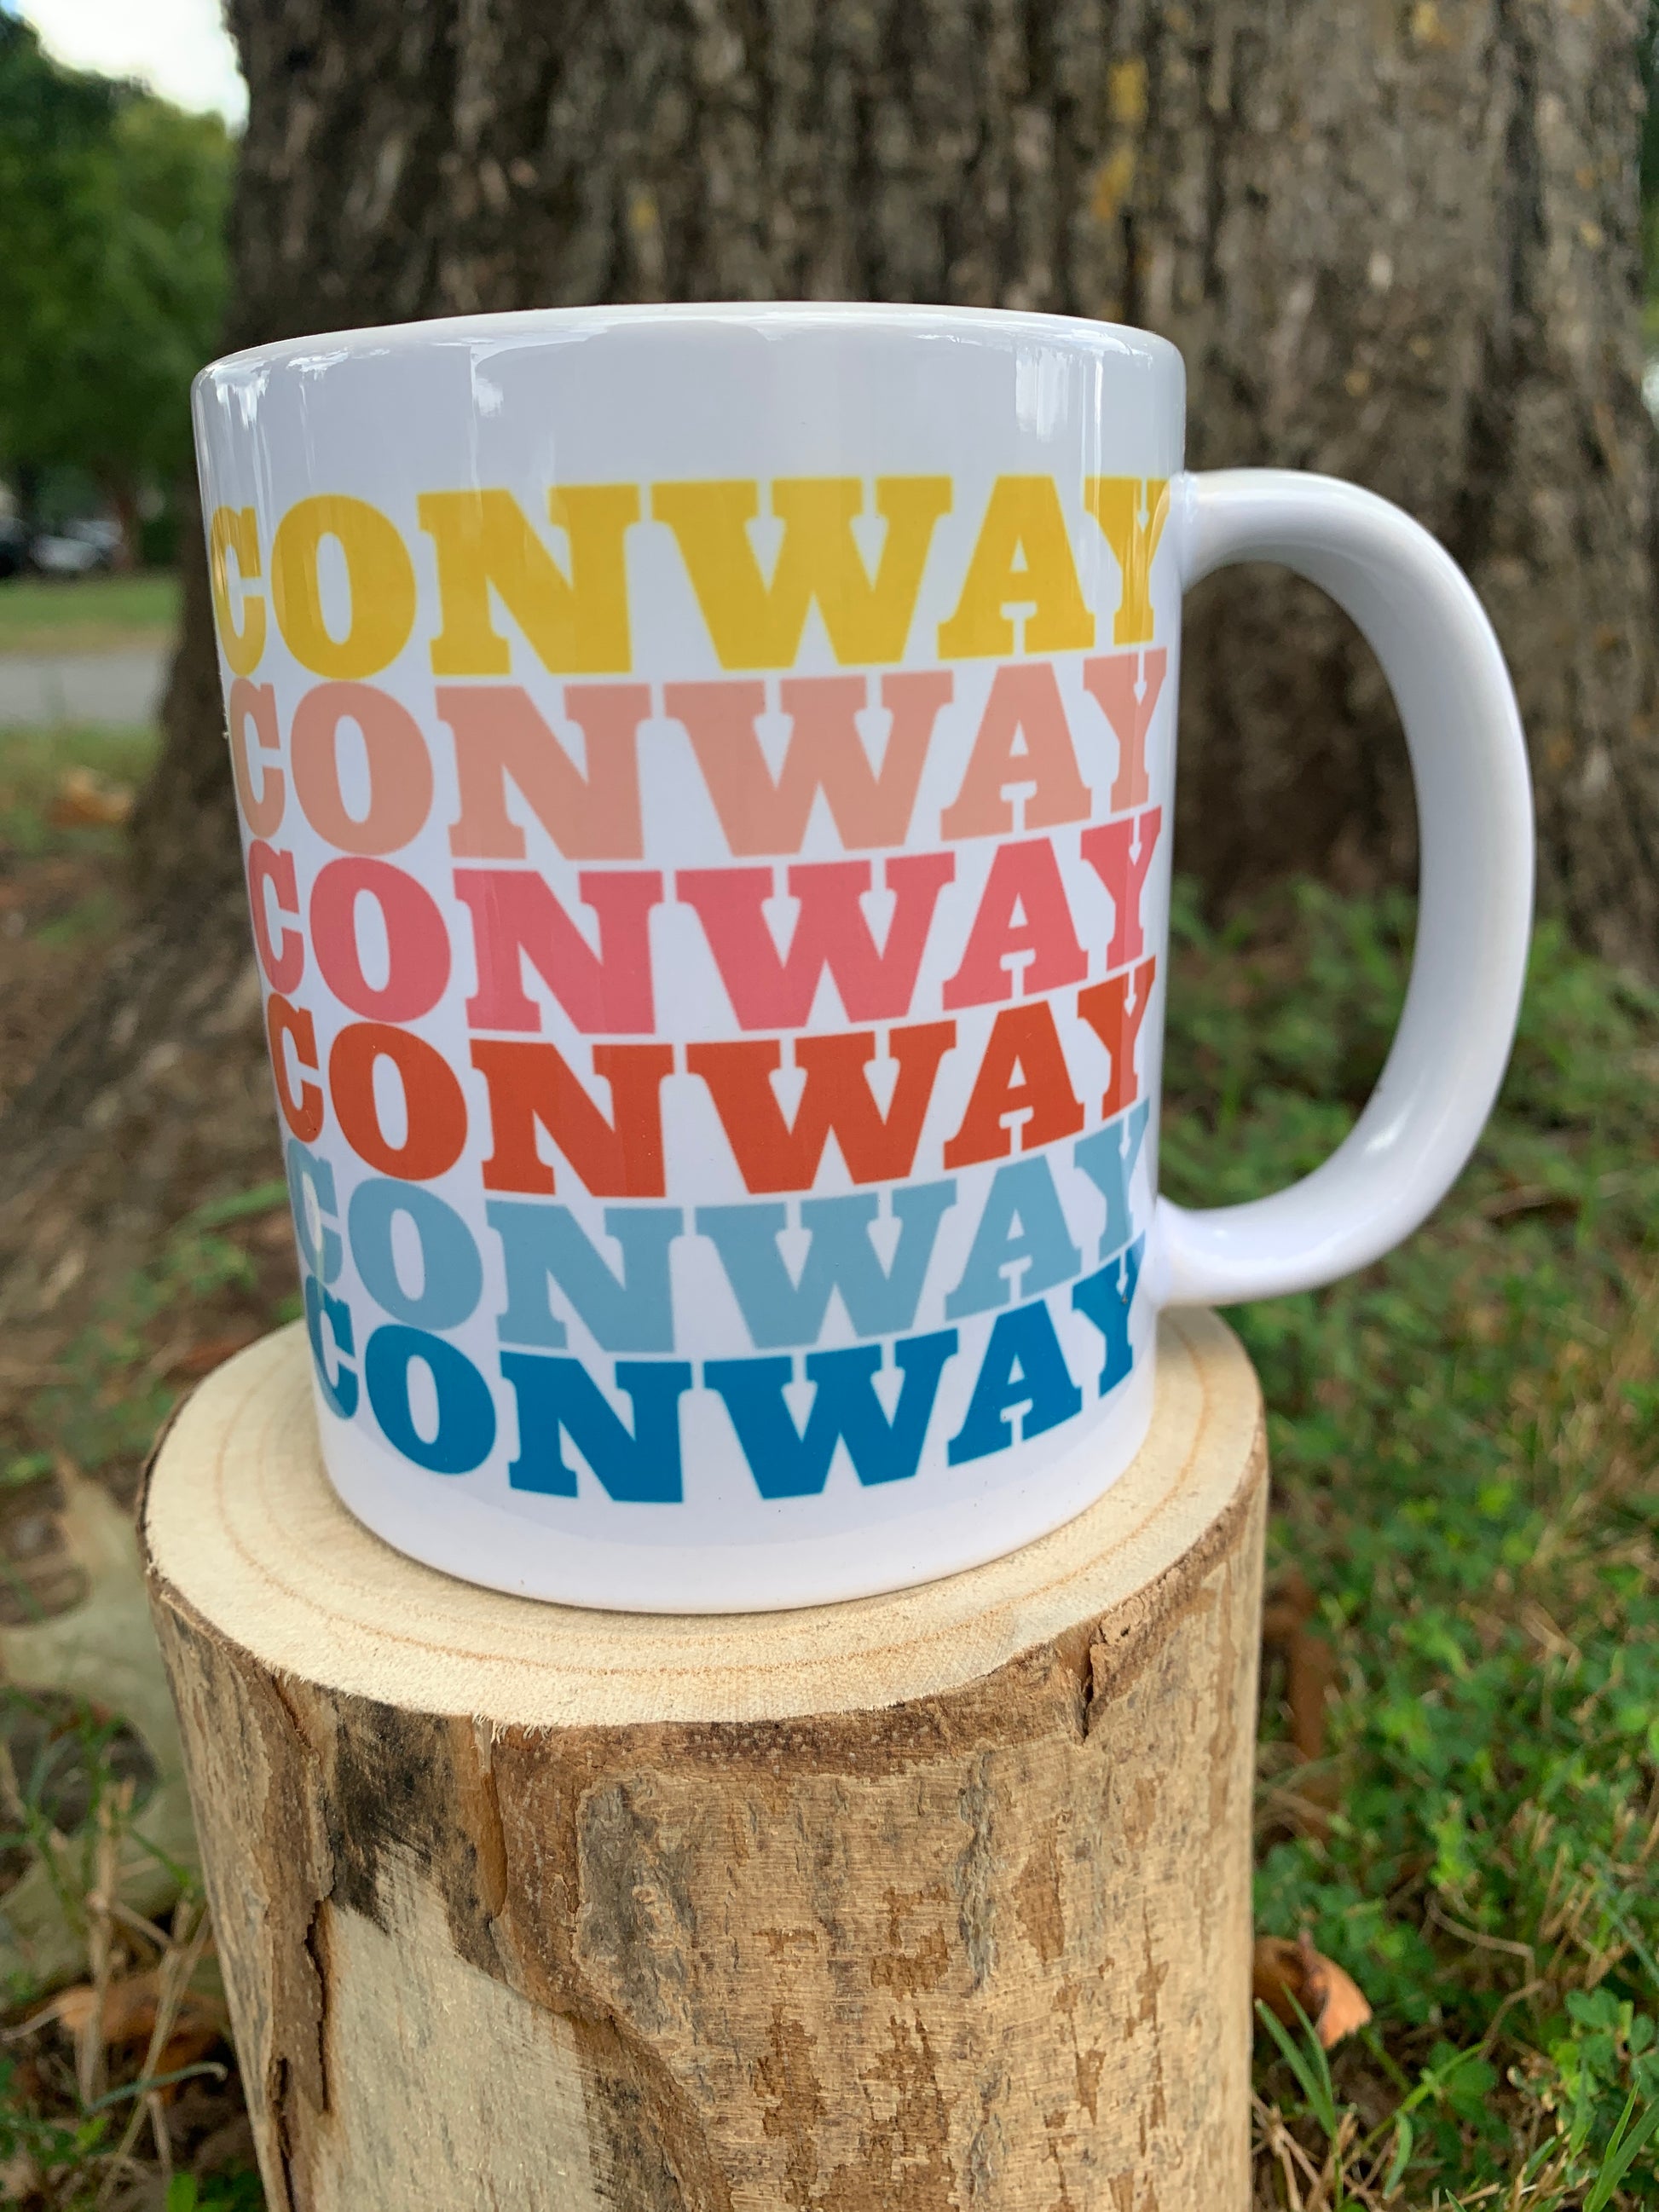 white ceramic mug with "conway" written six times in rainbow colors.